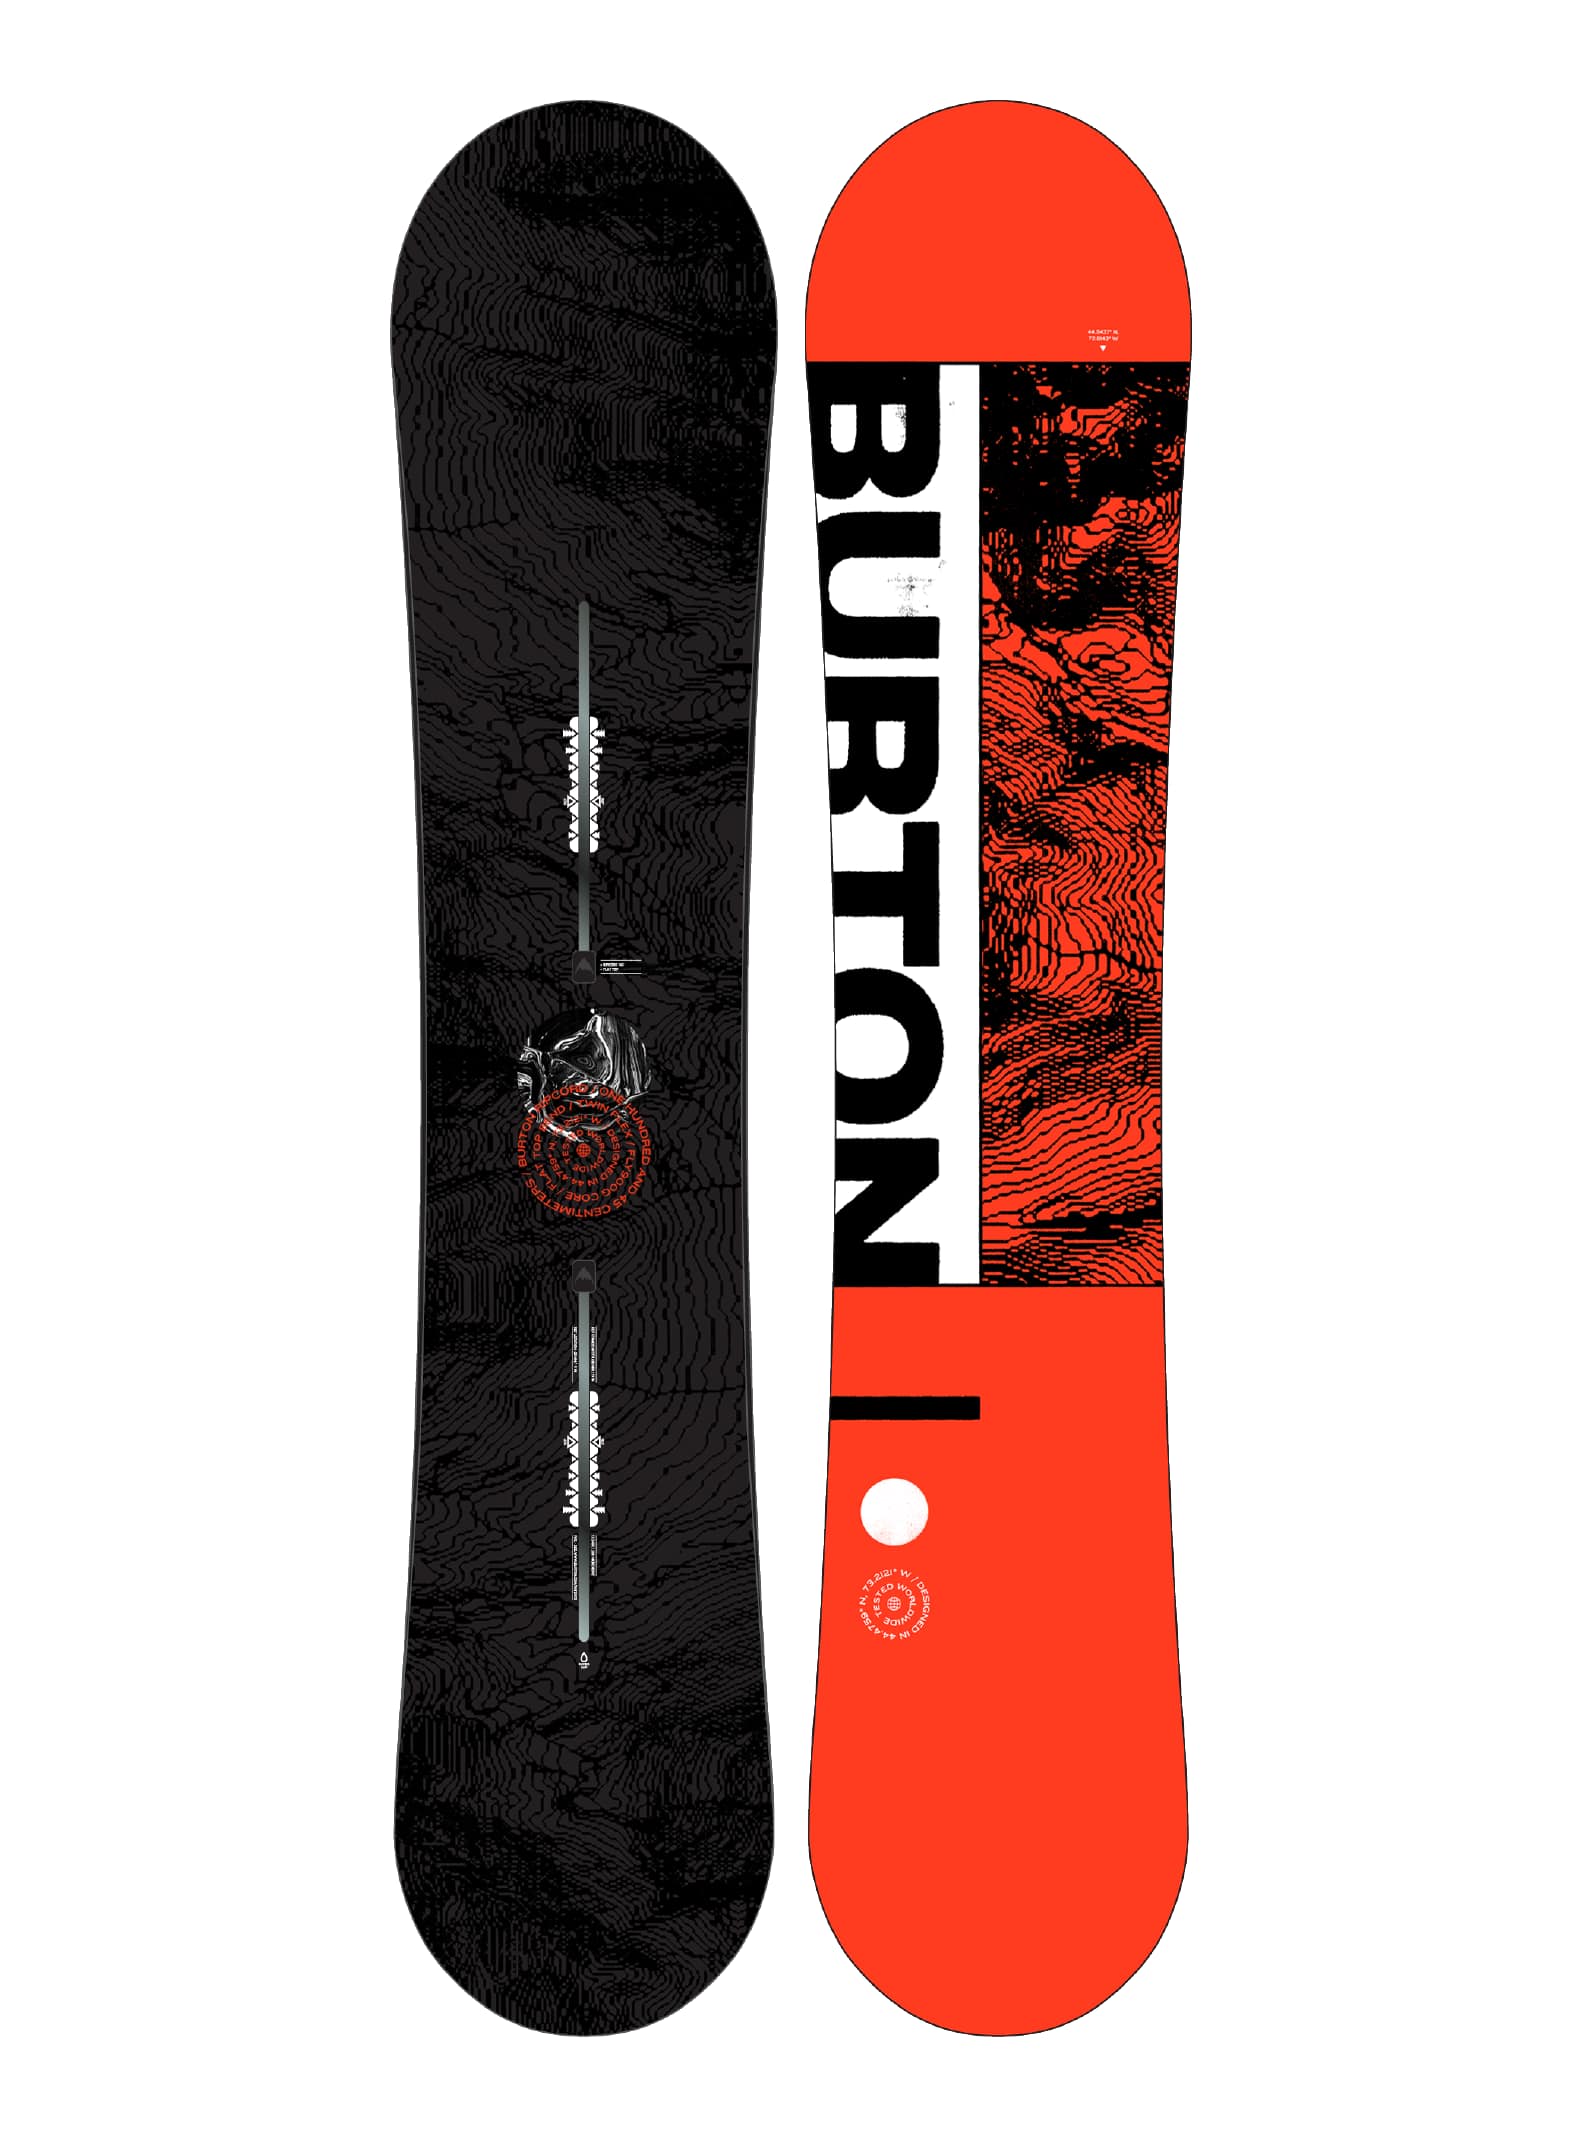 Snowboard Packages | Board, Bindings & Boots | Burton.com US